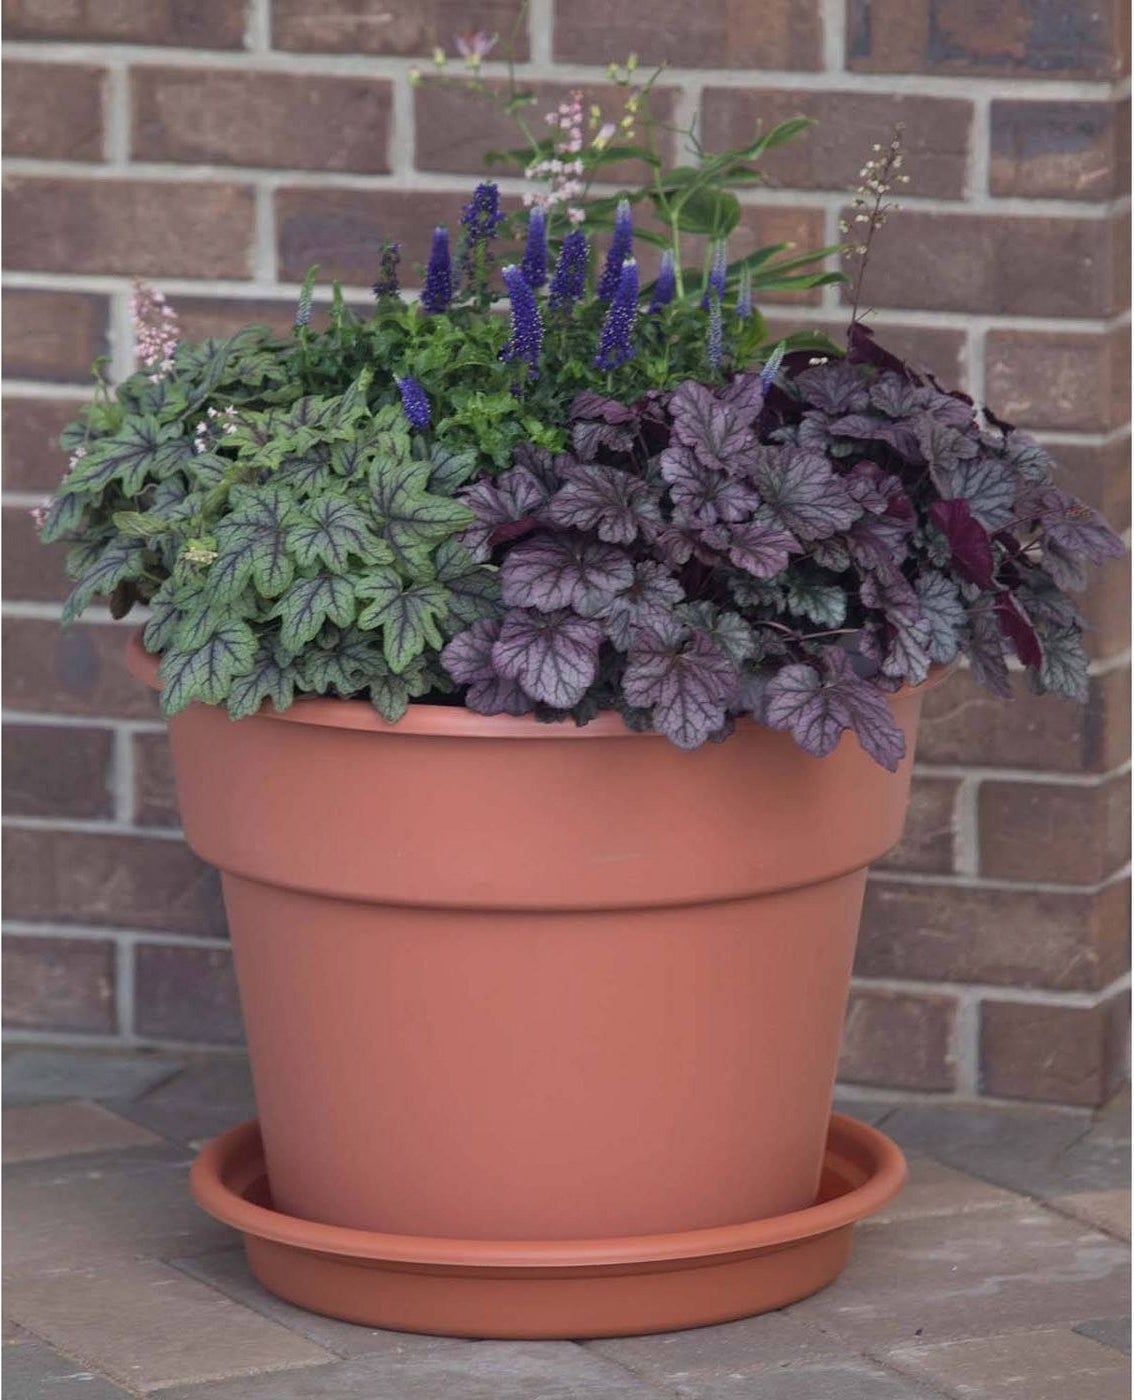 The double lipped planter with a plant in it 